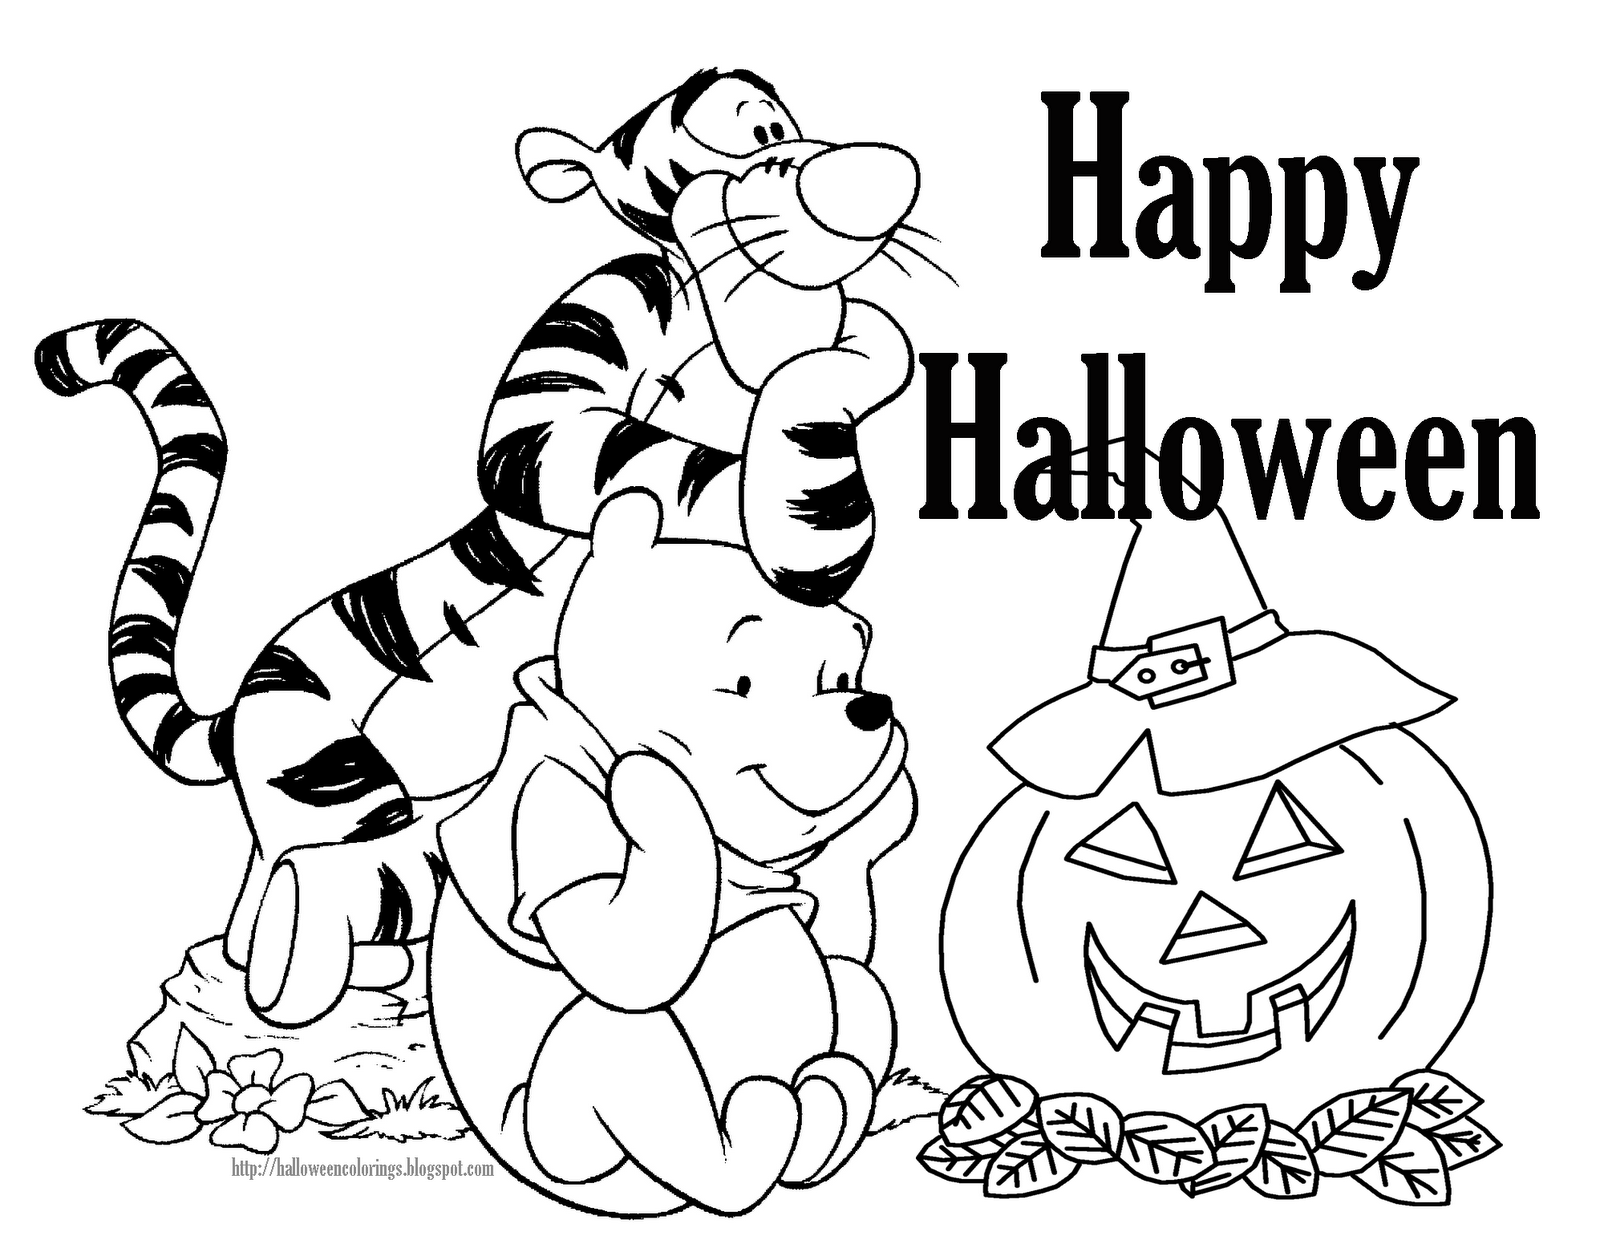 Halloween Coloring Page Printable | Free Coloring Pages